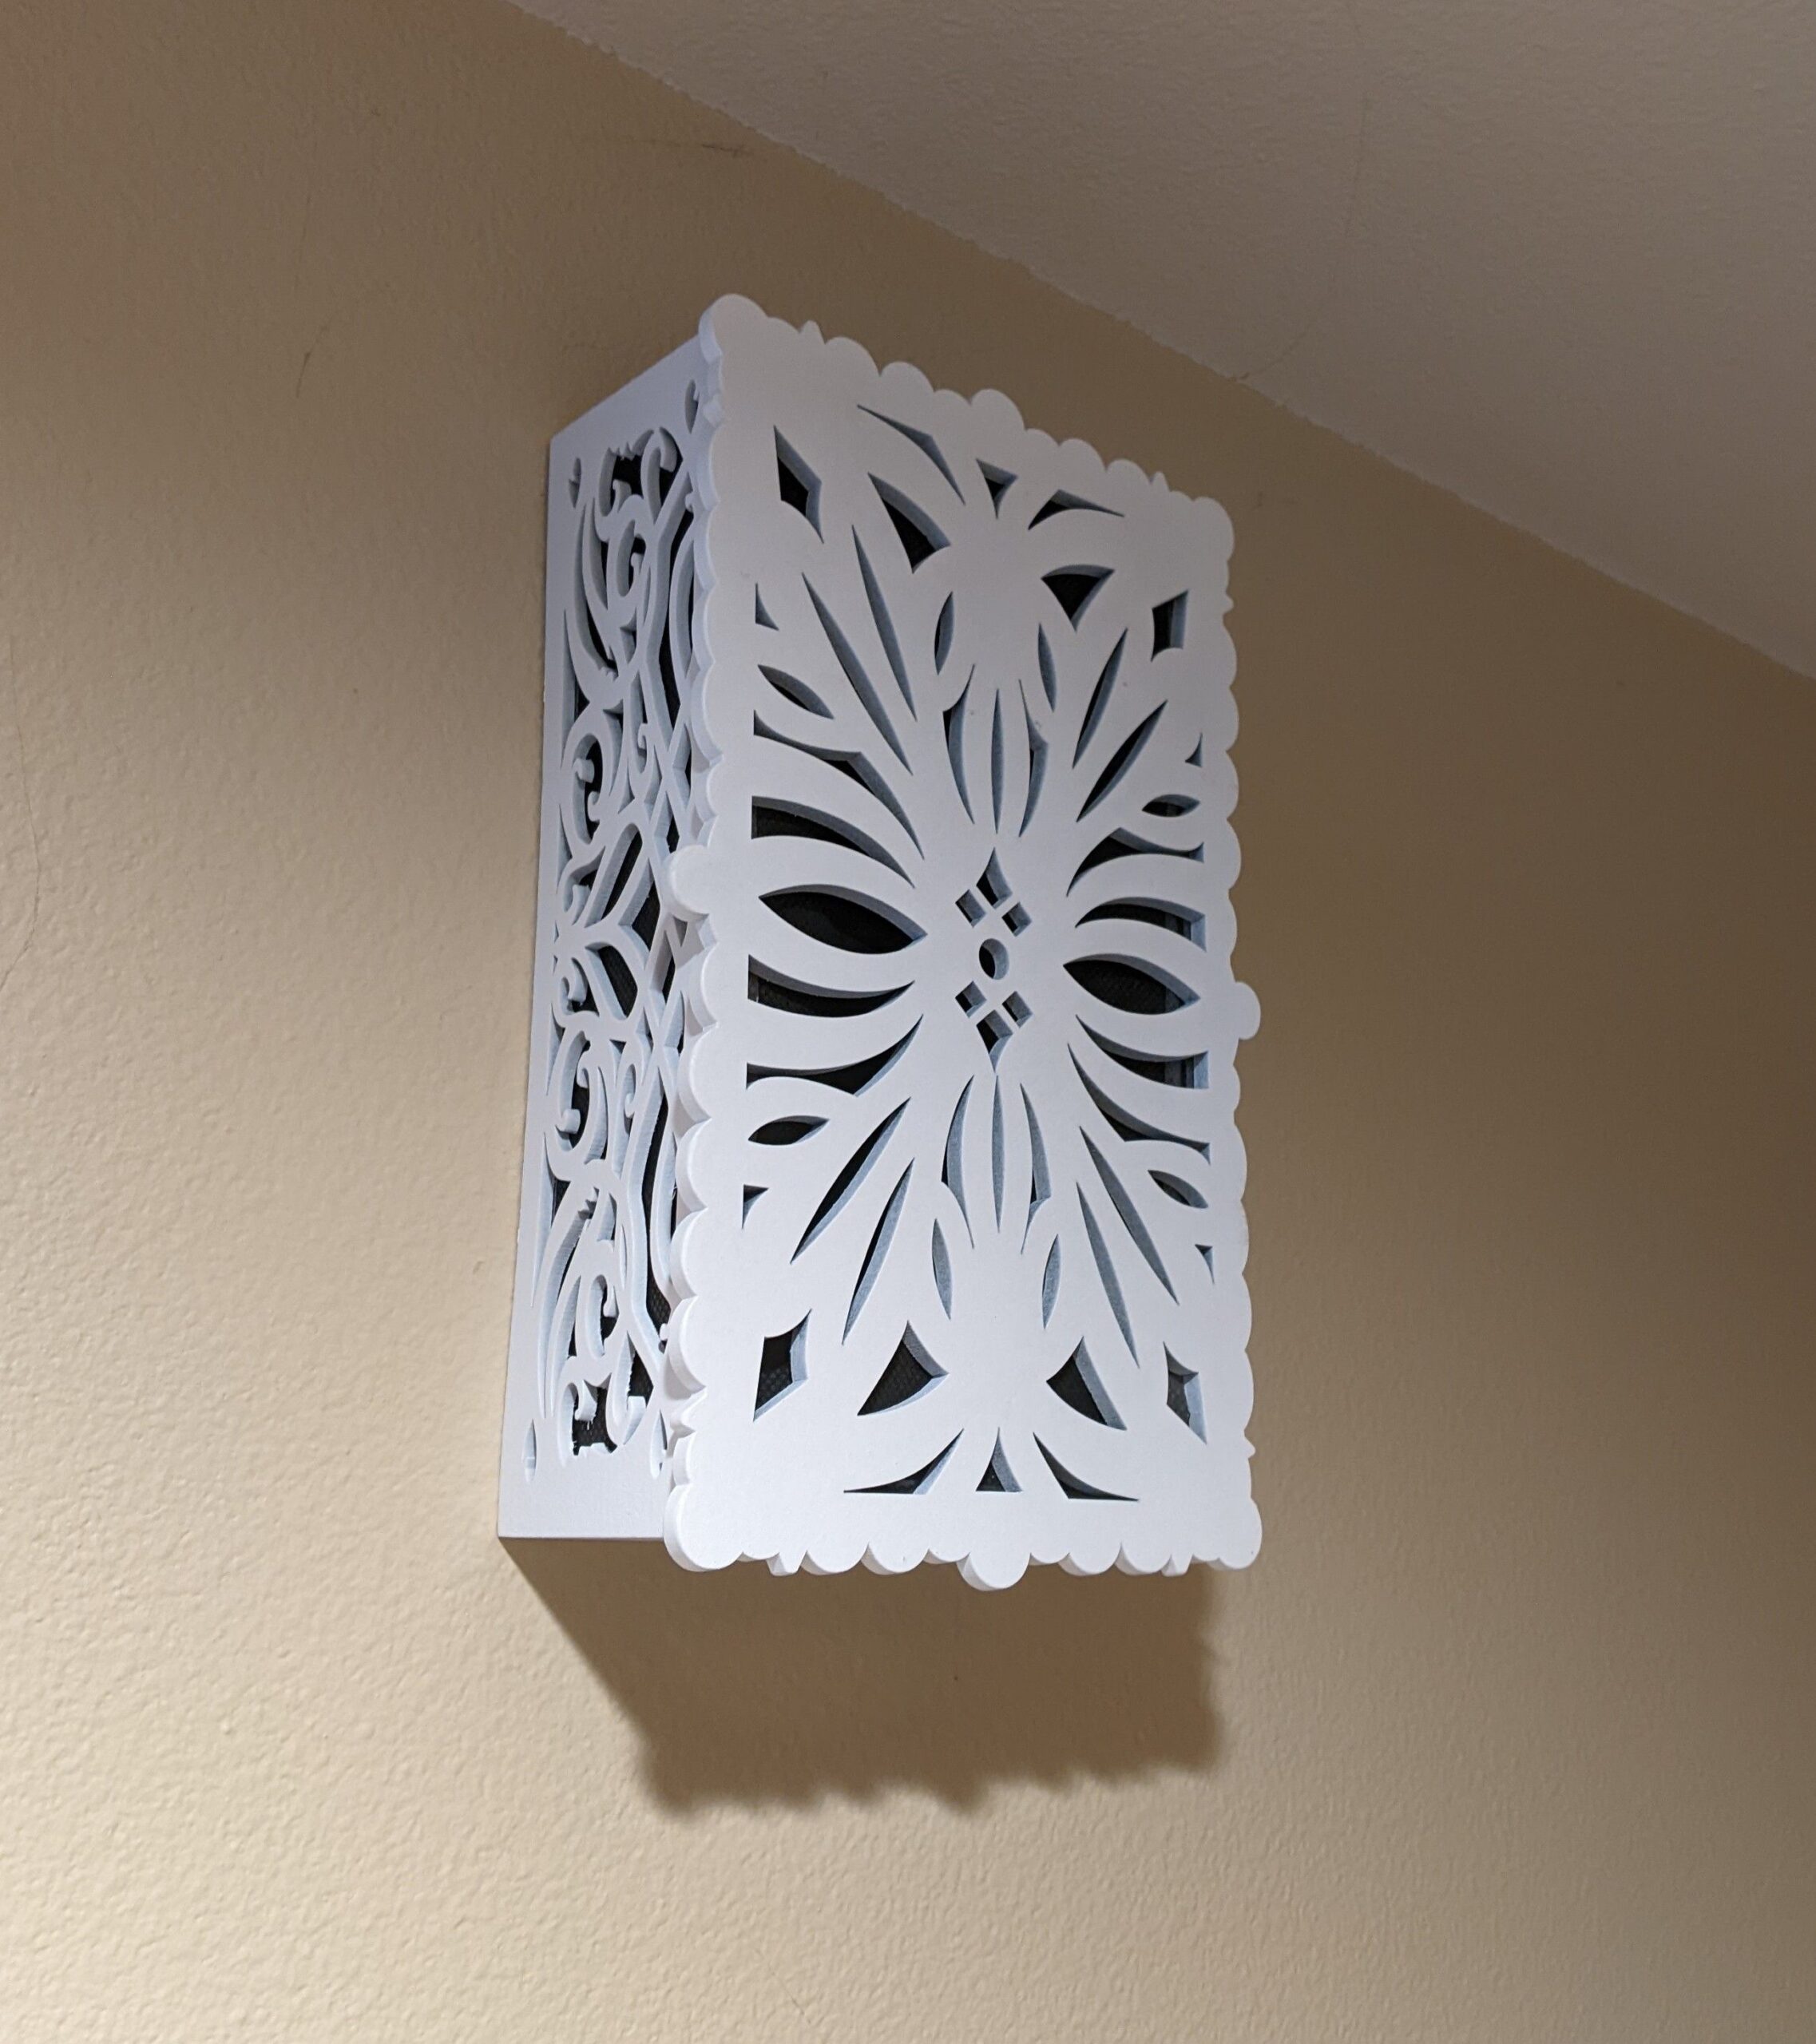 Decorative Doorbell Chime Covers